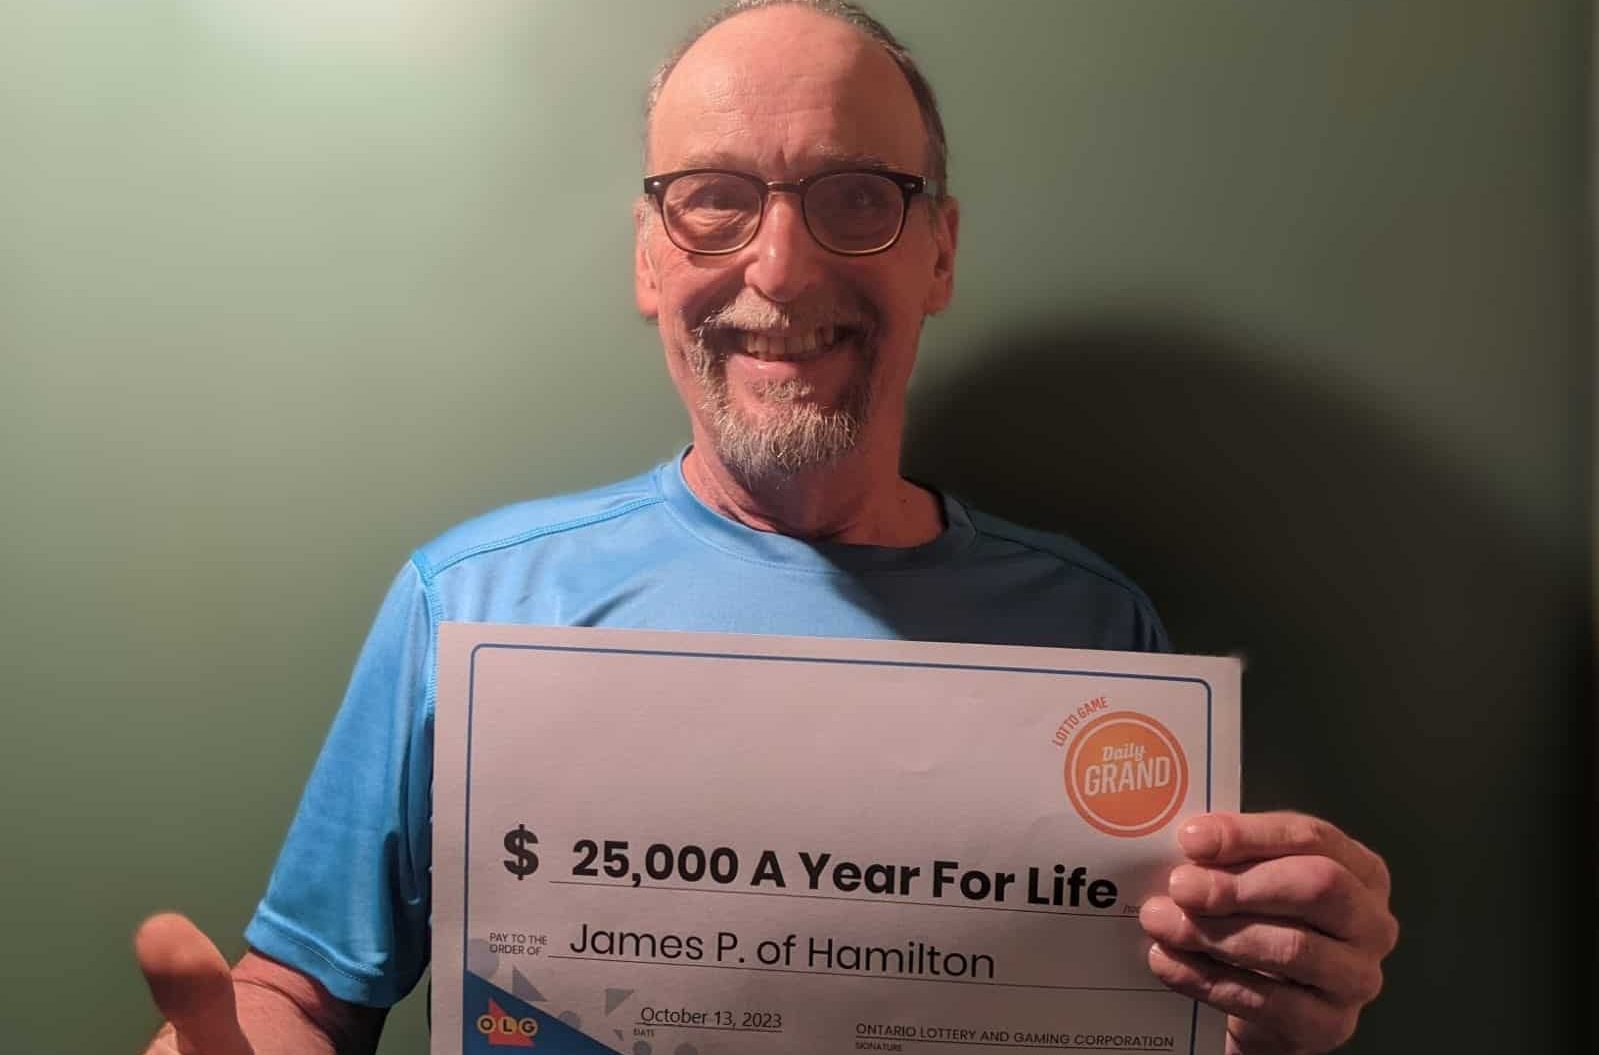 Life gets grand for Hamilton Resident as he quietly claims big cash prize